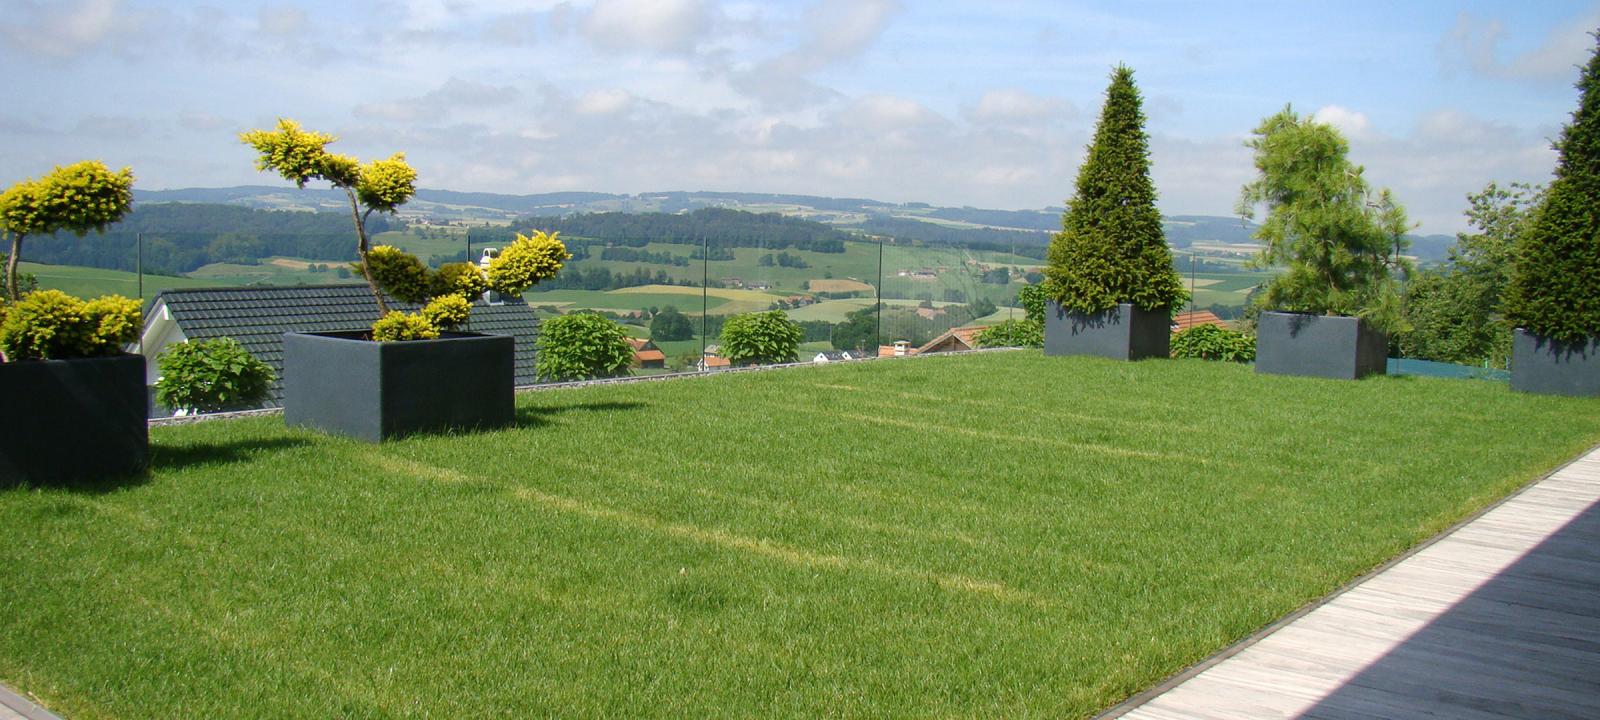 Green roof with lawn and ornamental trees in planters